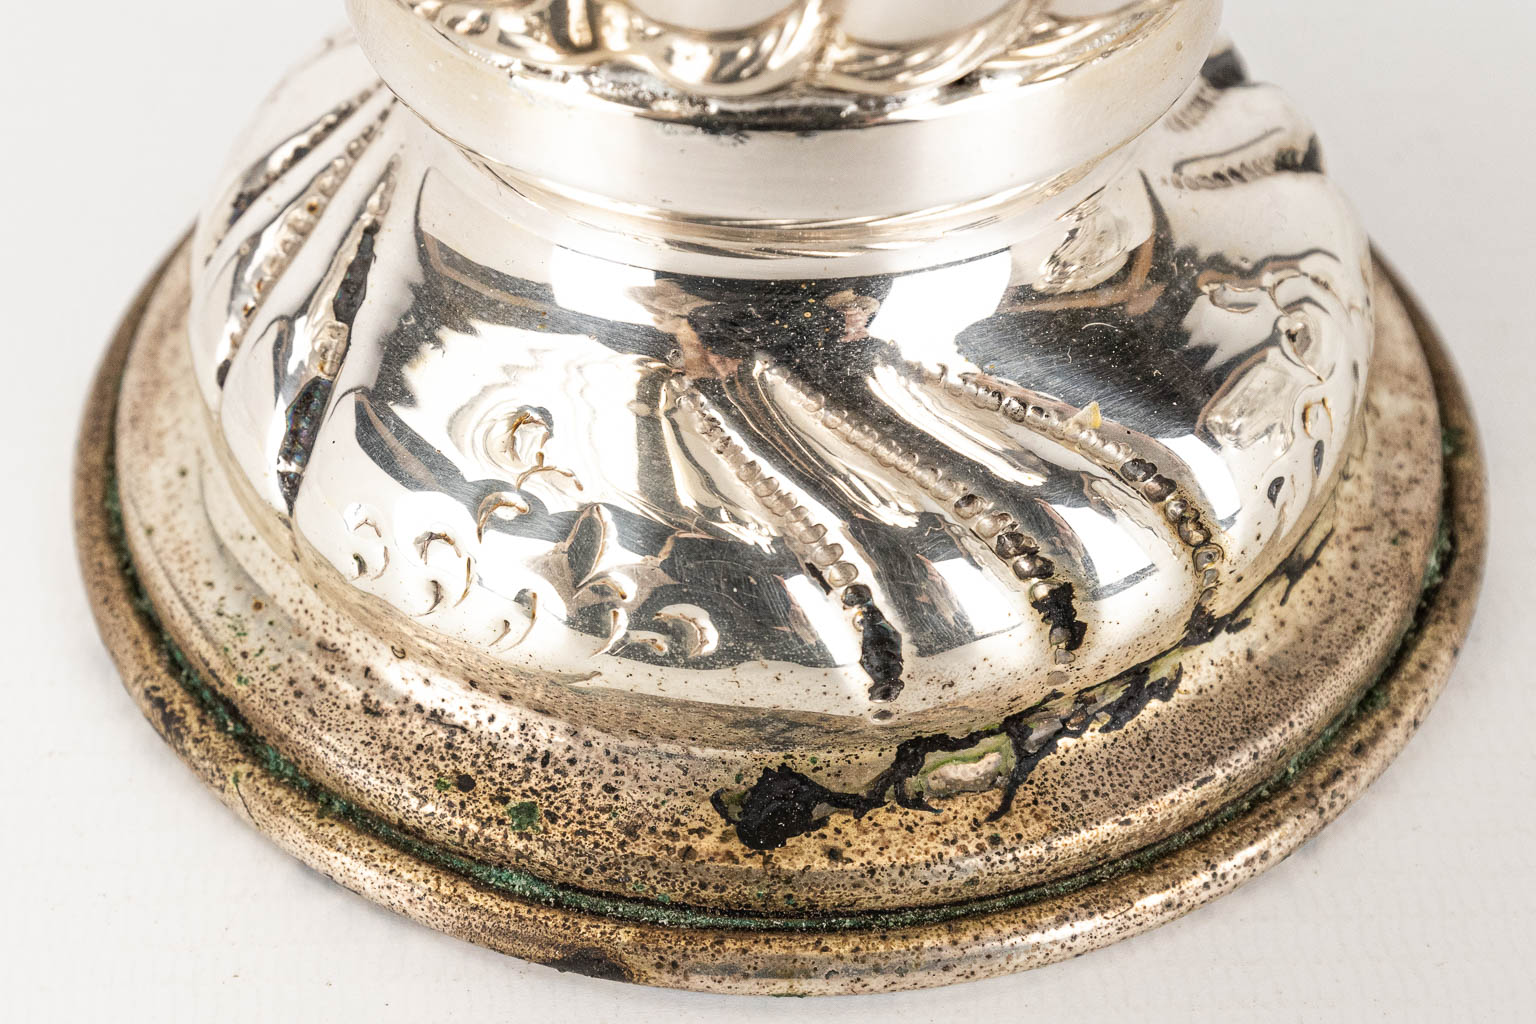 A pair of silver-plated vases and marked Argto/1000. Made in Italy. 